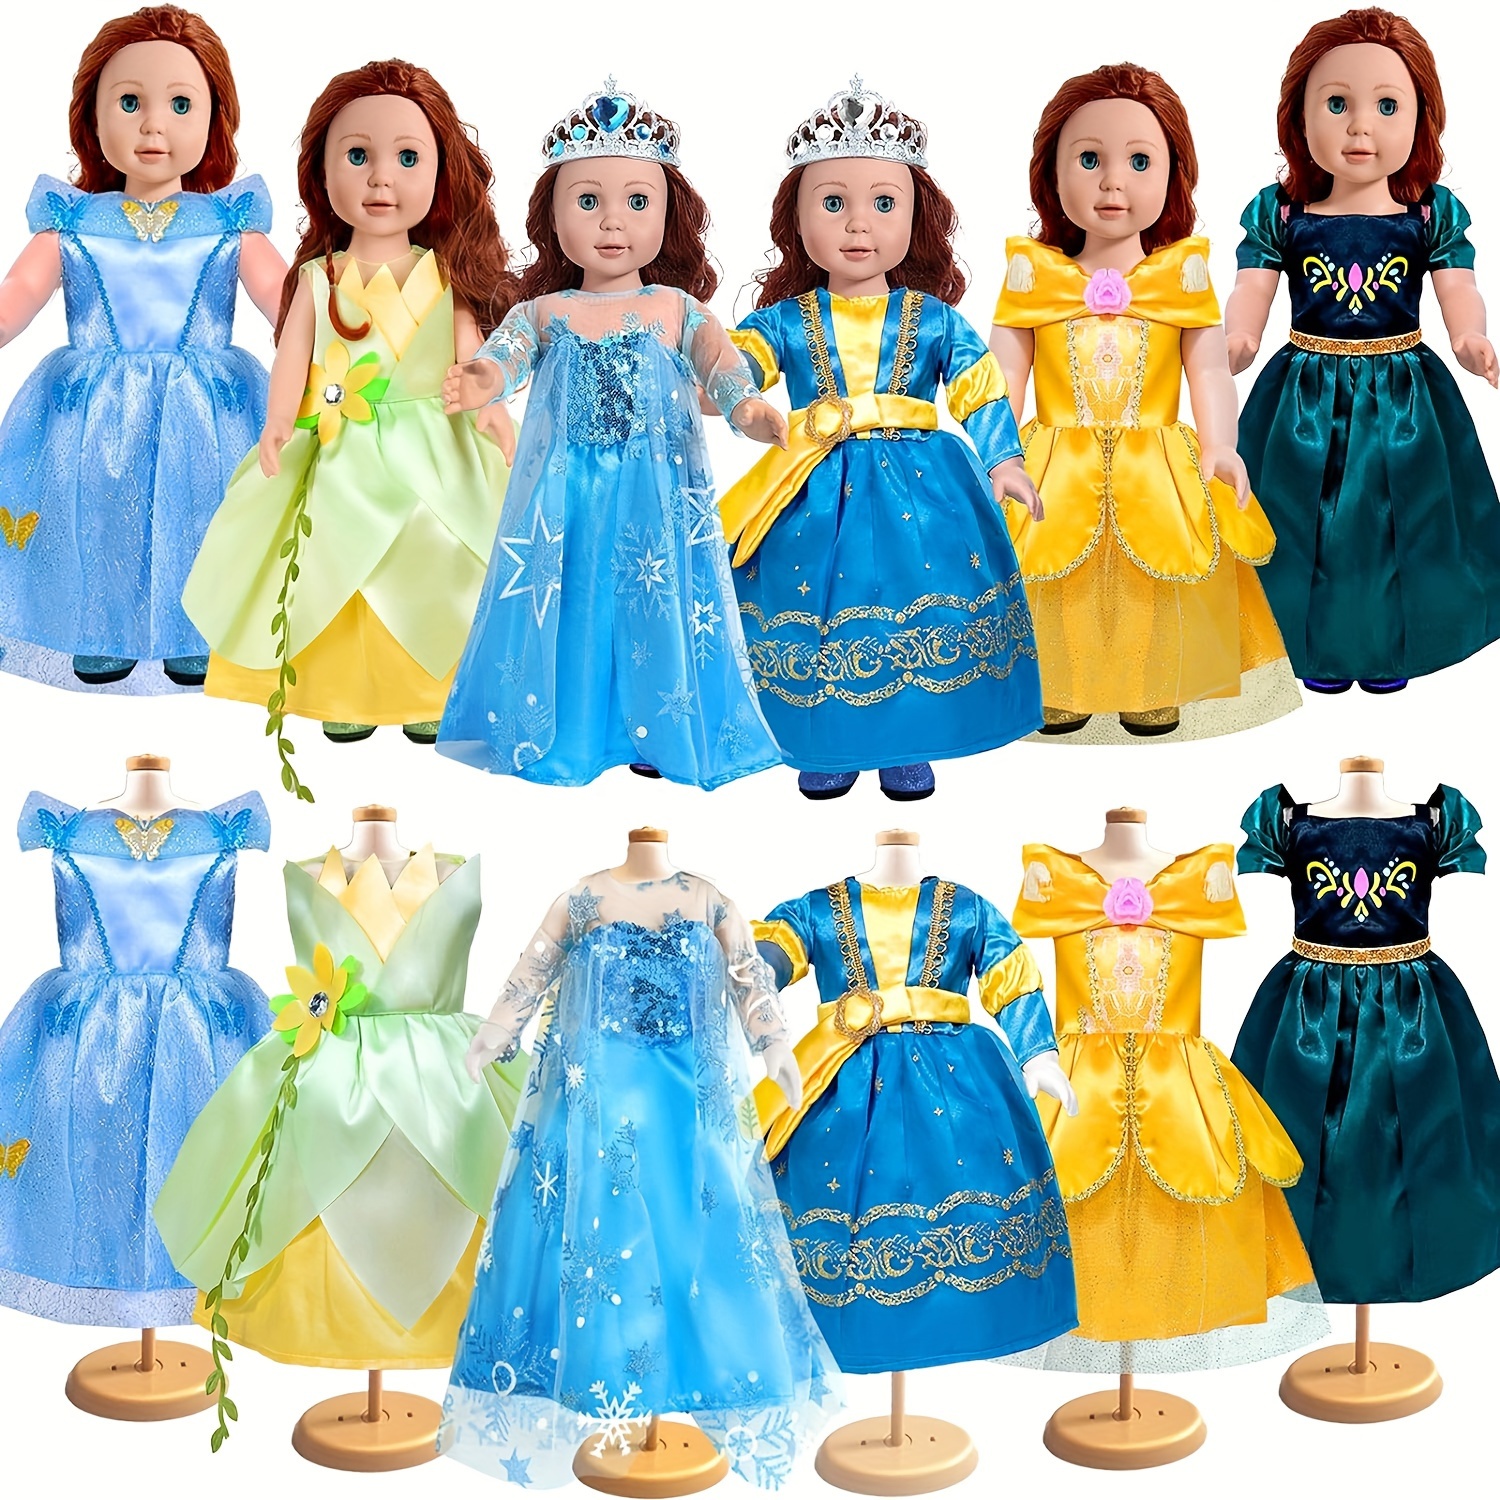 8 Styles New Handmade Doll Clothes Princess Dresses for Grows Outfit for 11  Inches Doll Dress Weddingg Dress Gift Accessories for 28 CM-30 CM Doll